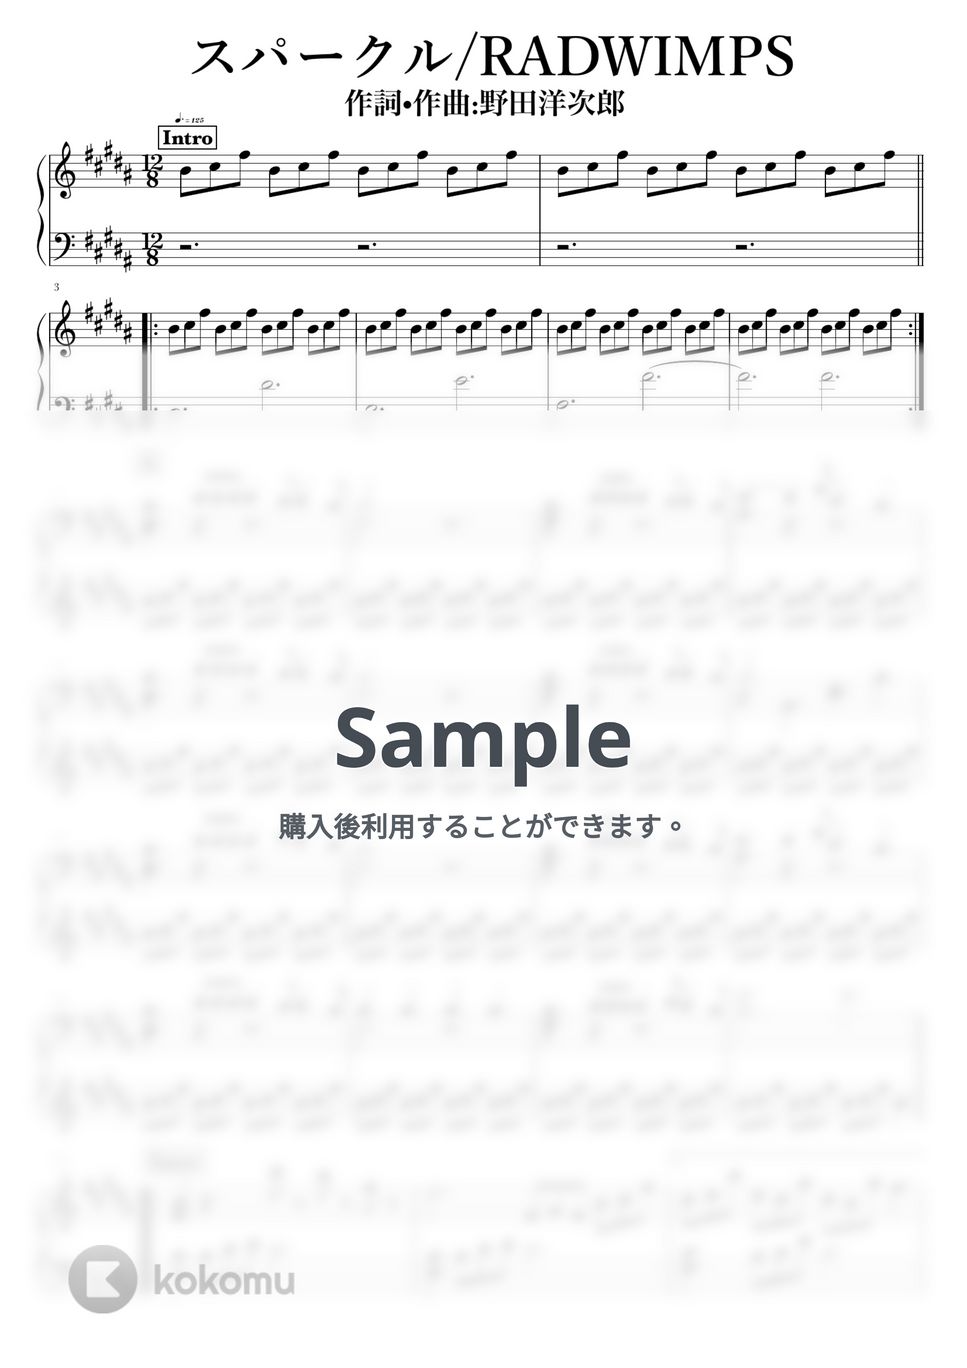 RADWIMPS - スパークル by NOTES music